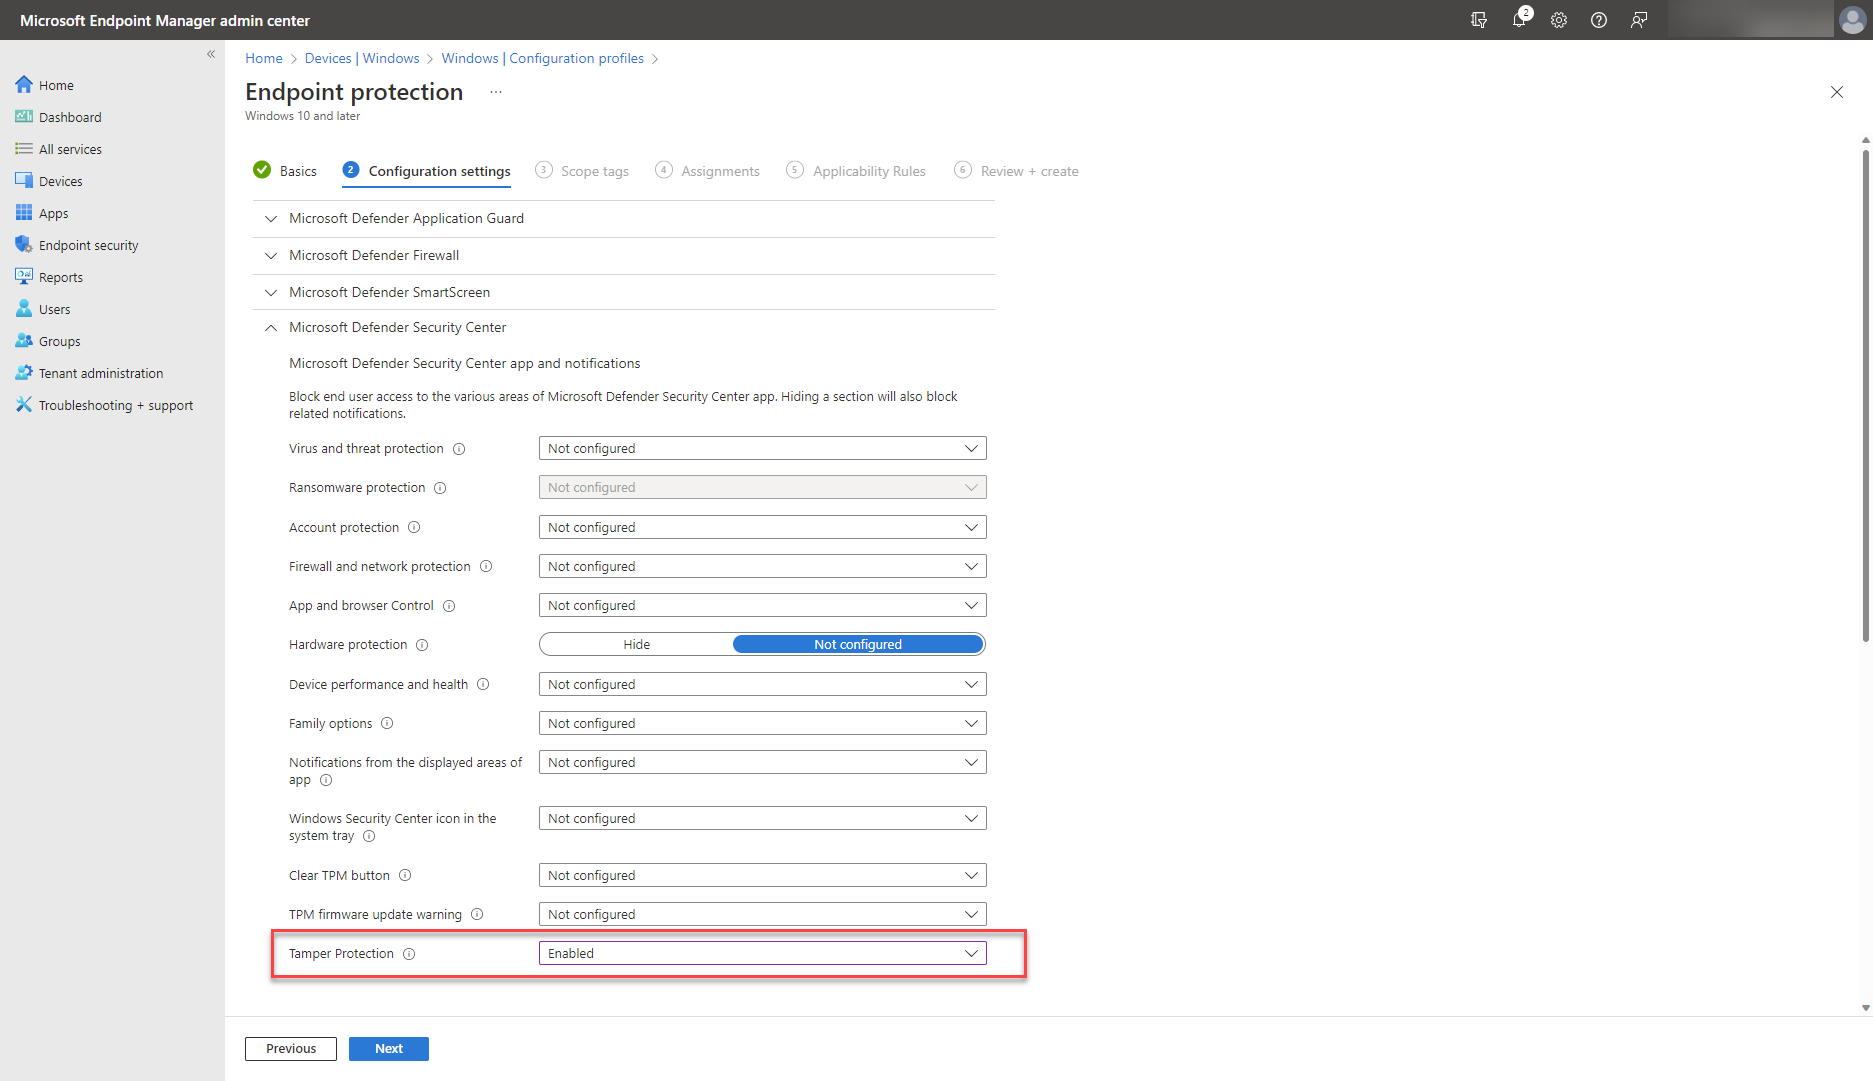 A screenshot of the Microsoft Defender security center options in Microsoft Intune, focused on enabled Tamper protection.